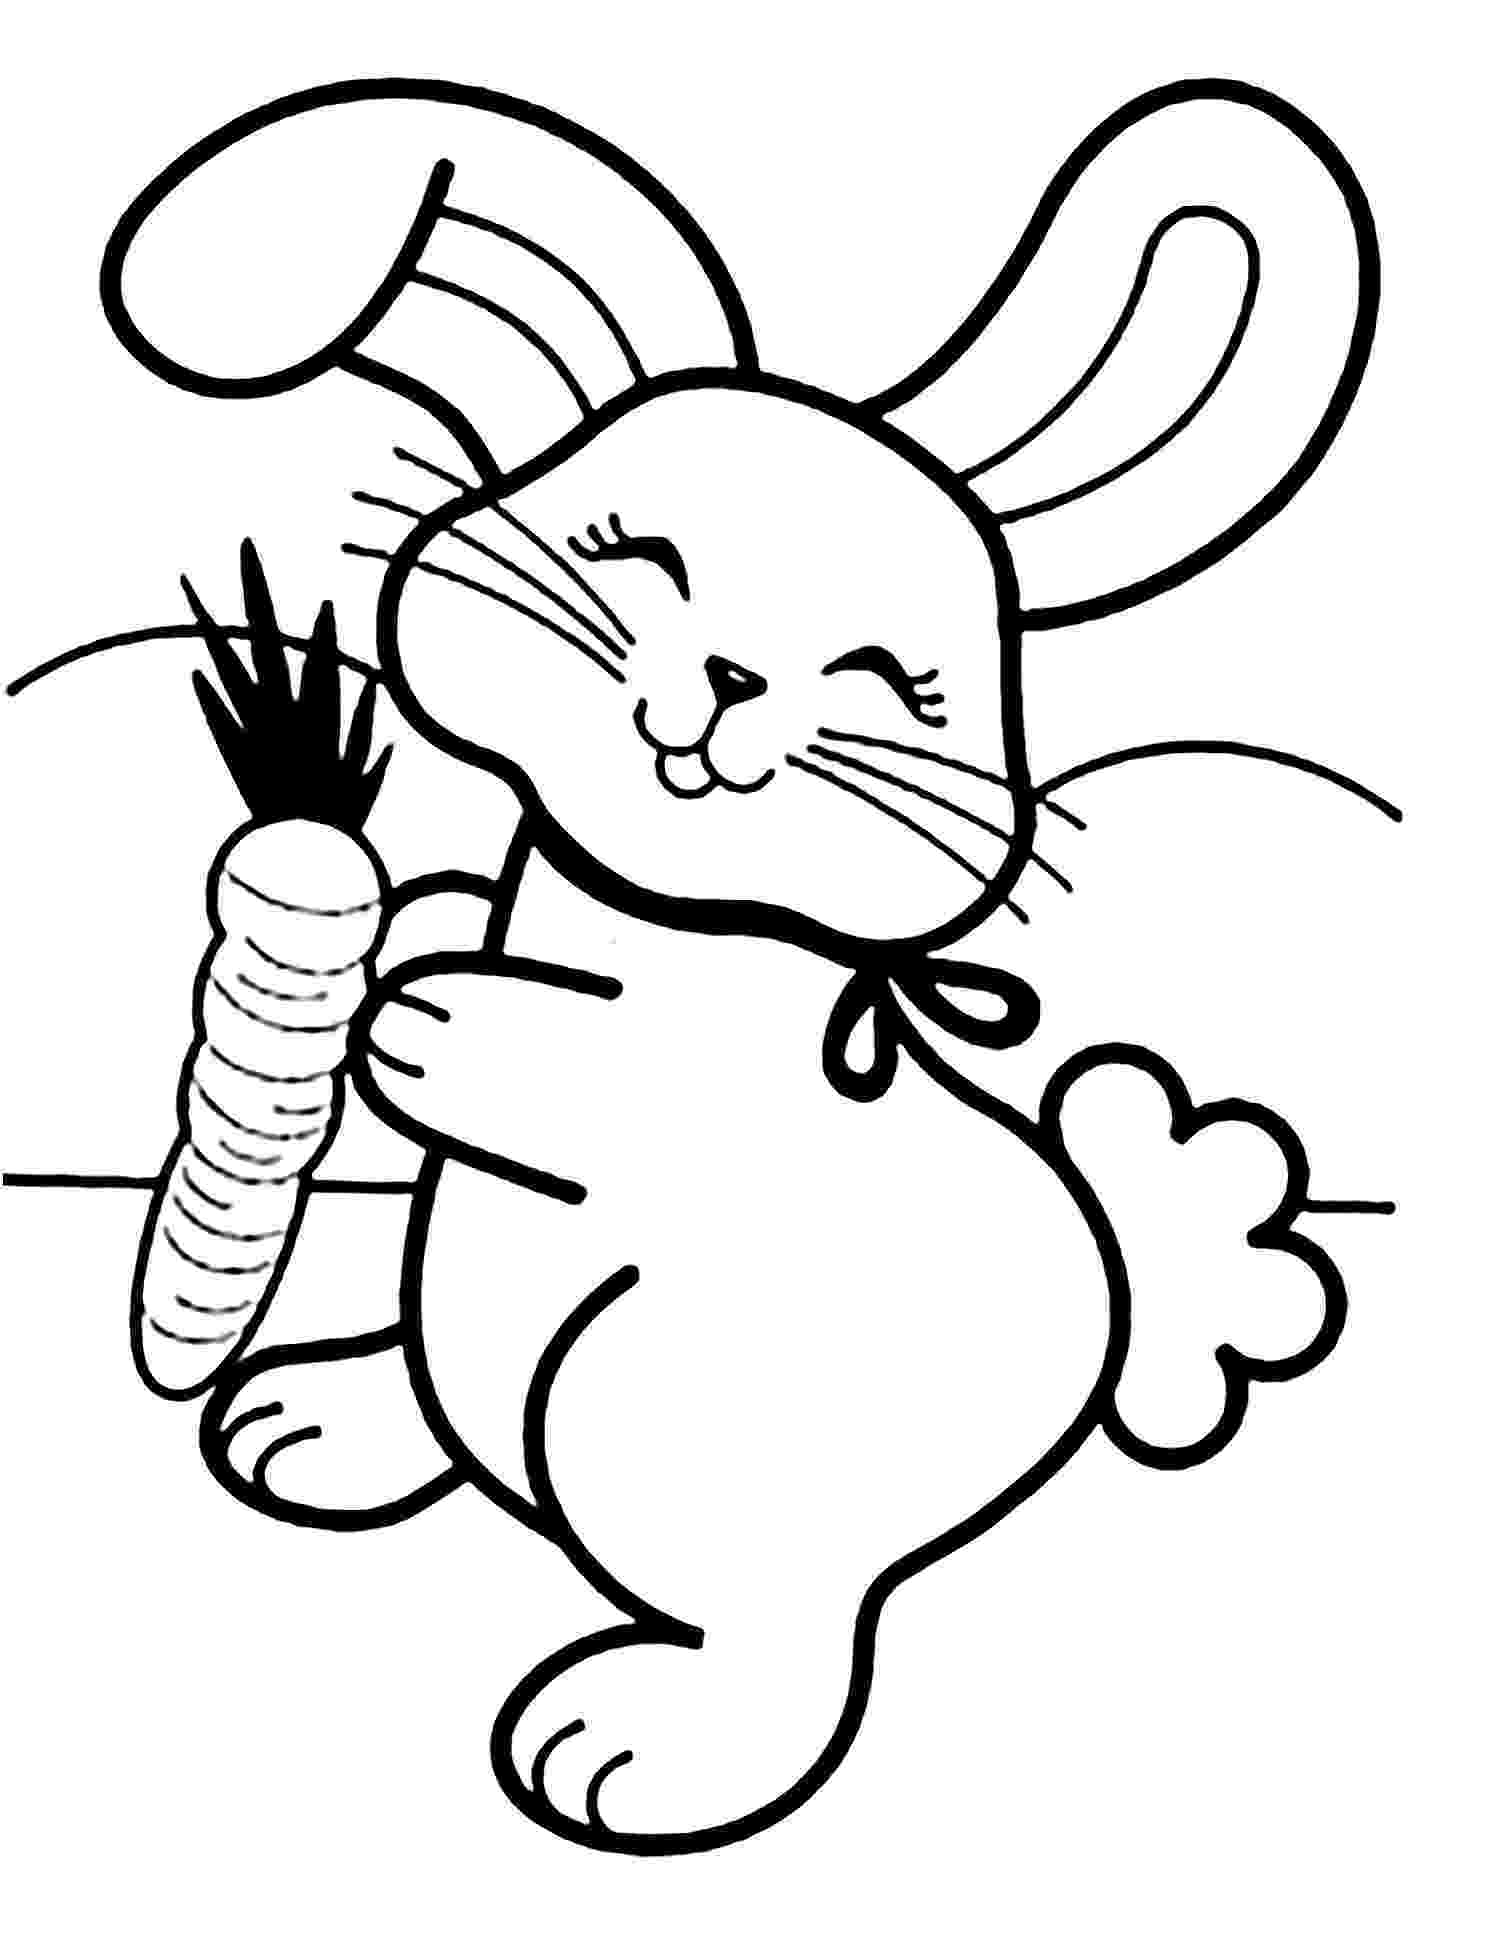 bunny coloring picture bunny coloring pages best coloring pages for kids bunny coloring picture 1 2